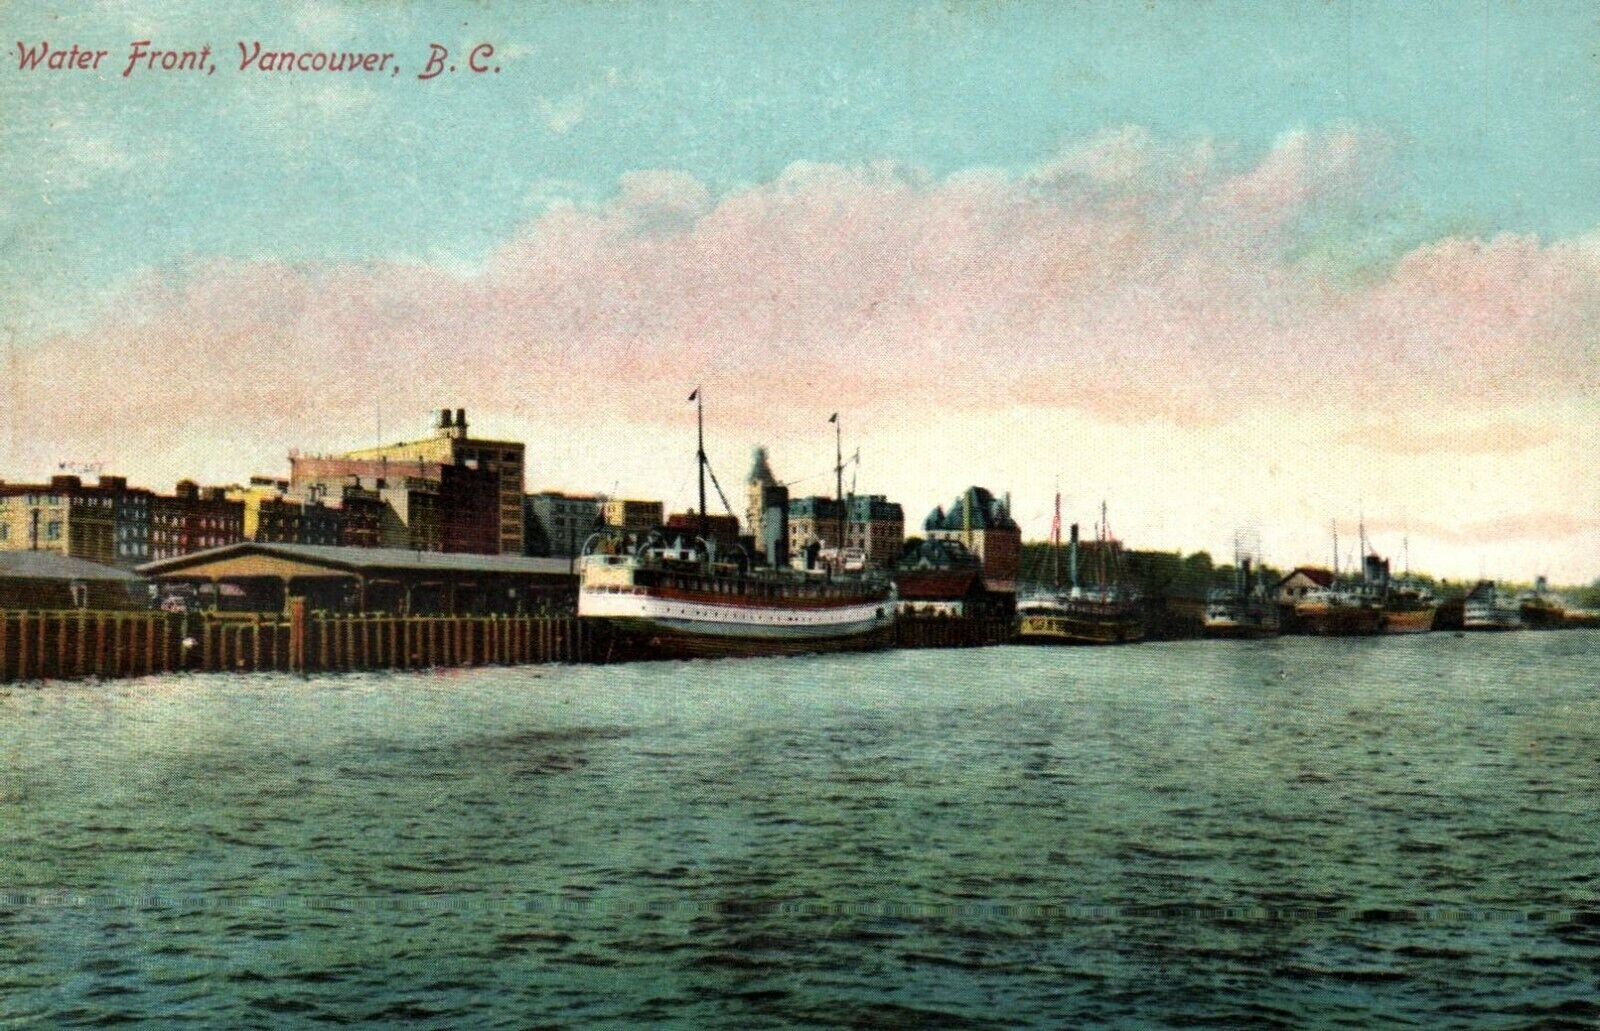 Vintage Postcard - B212 Water Front, Vancouver, B.C., Unposted, Early 1900's